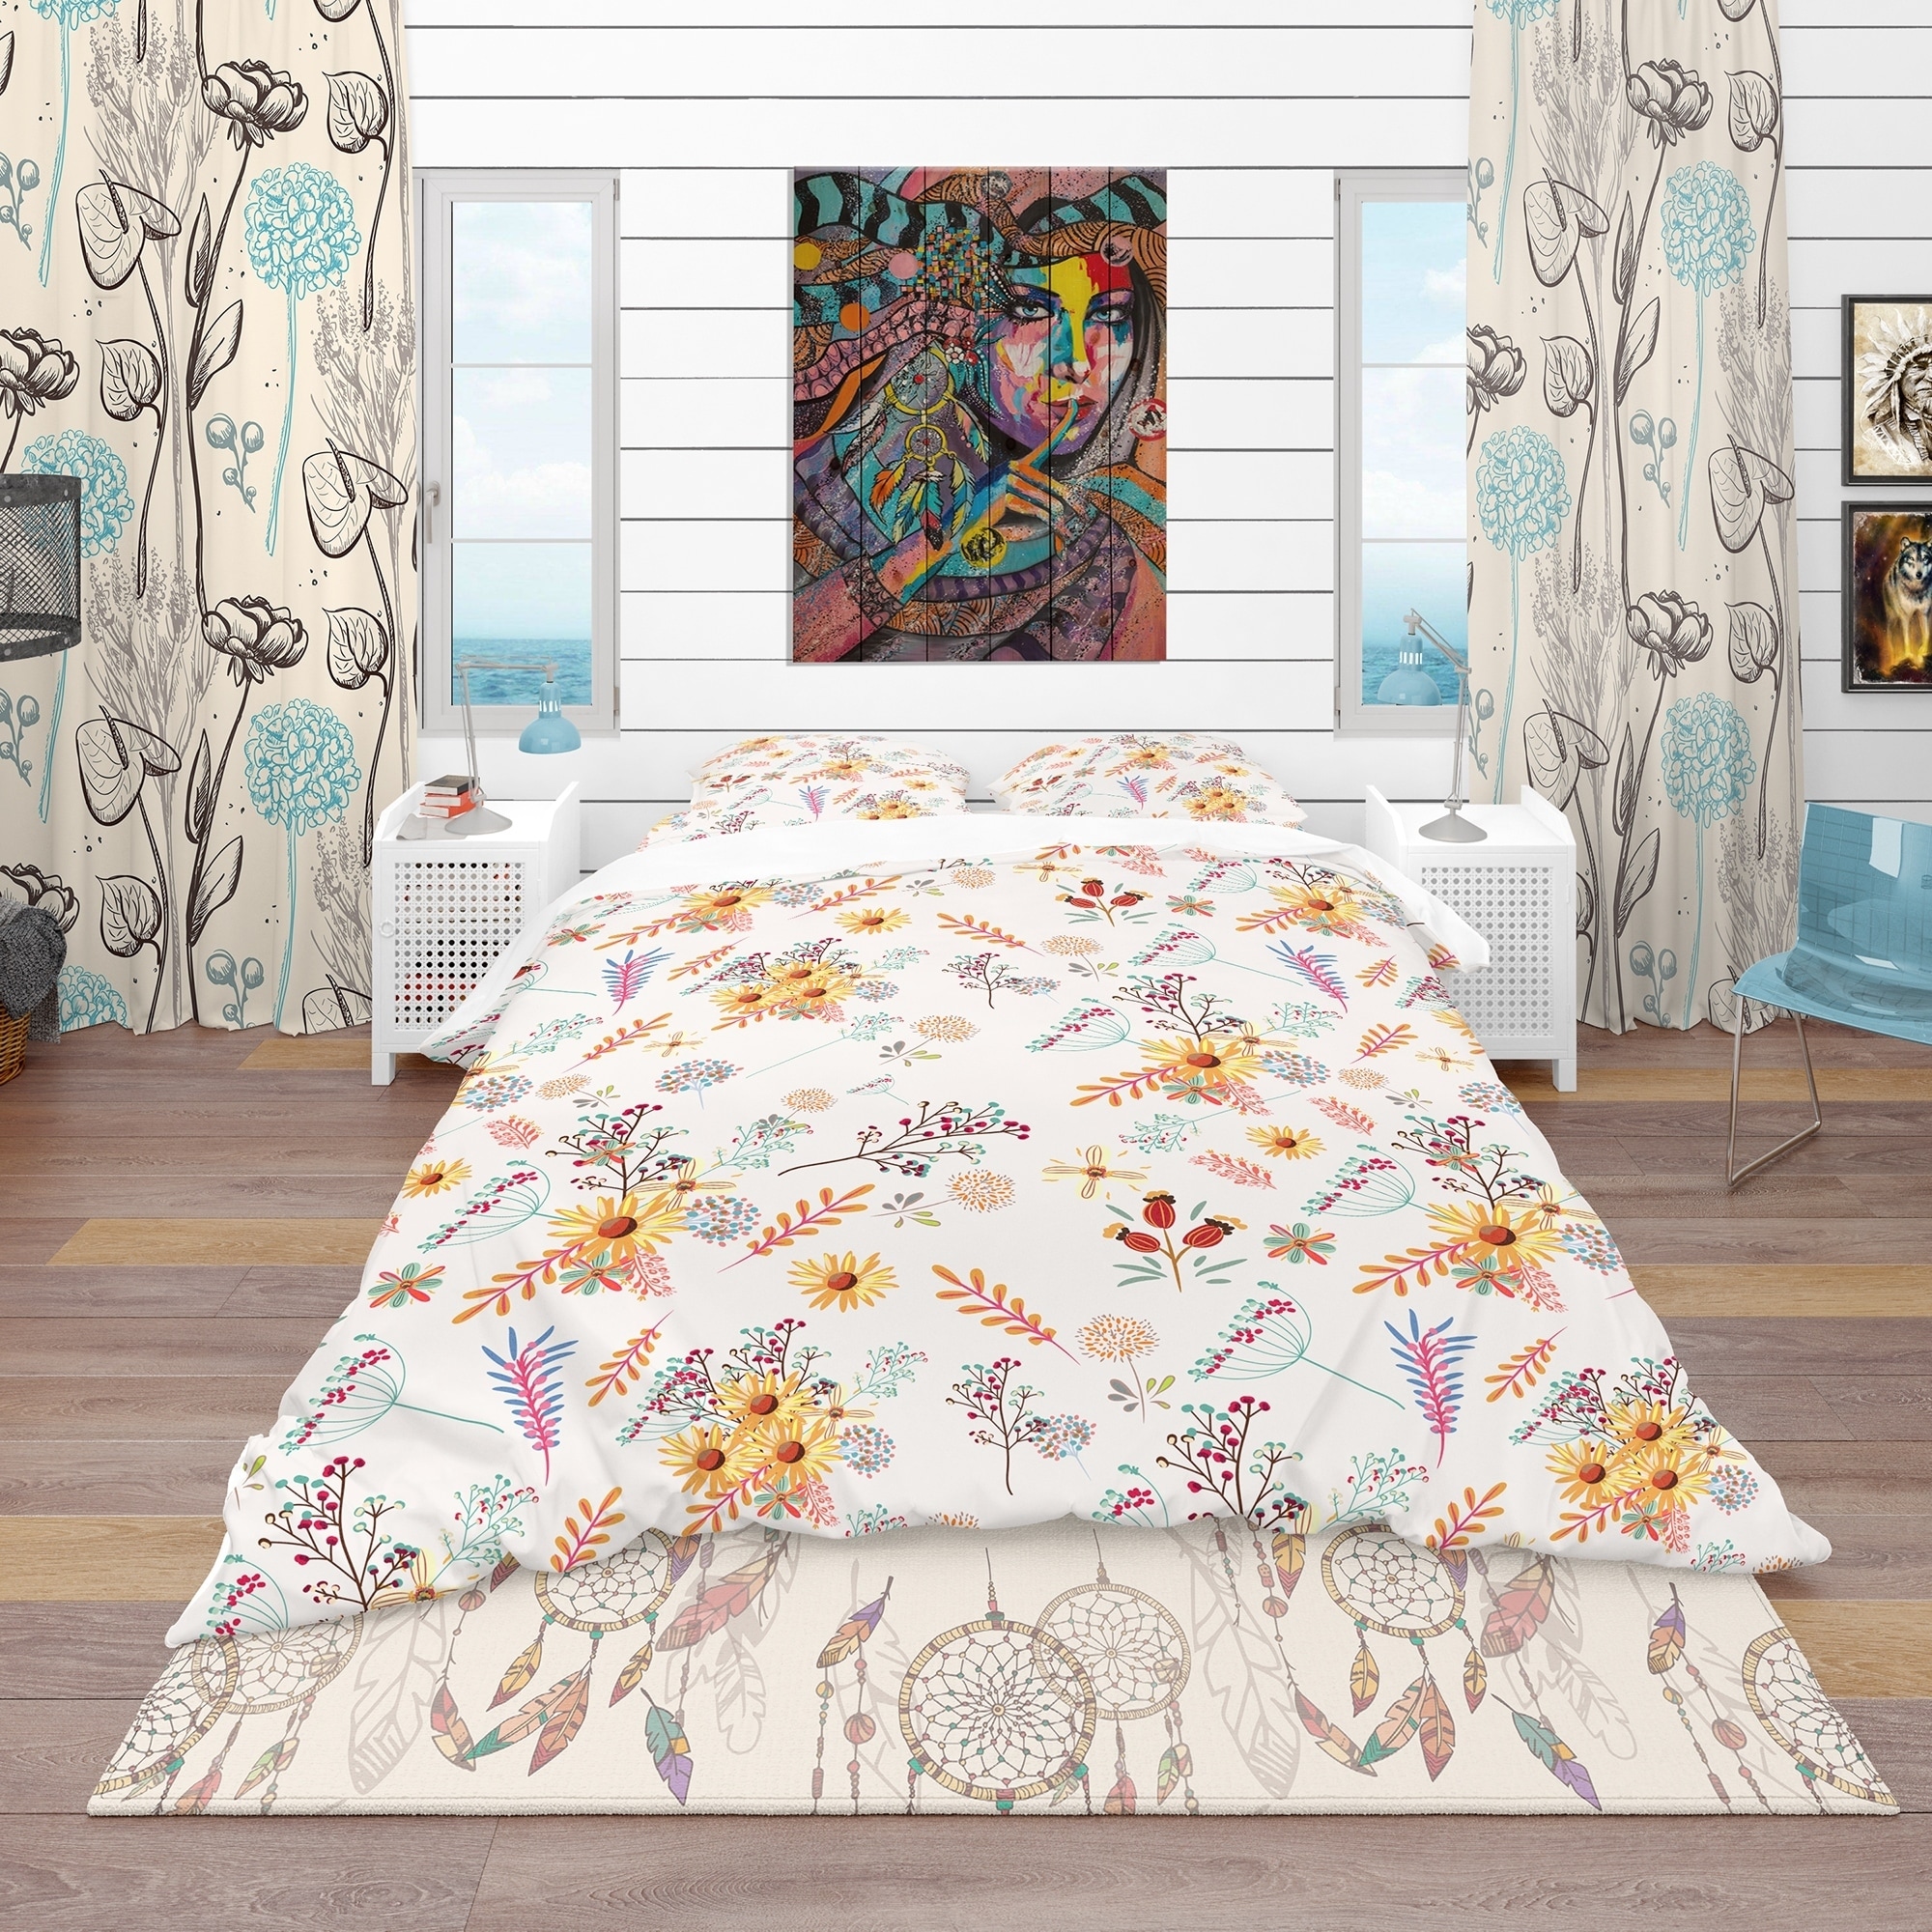 Brighton Floral Bold Funky Colourful Flowers Soft Duvet Cover Set